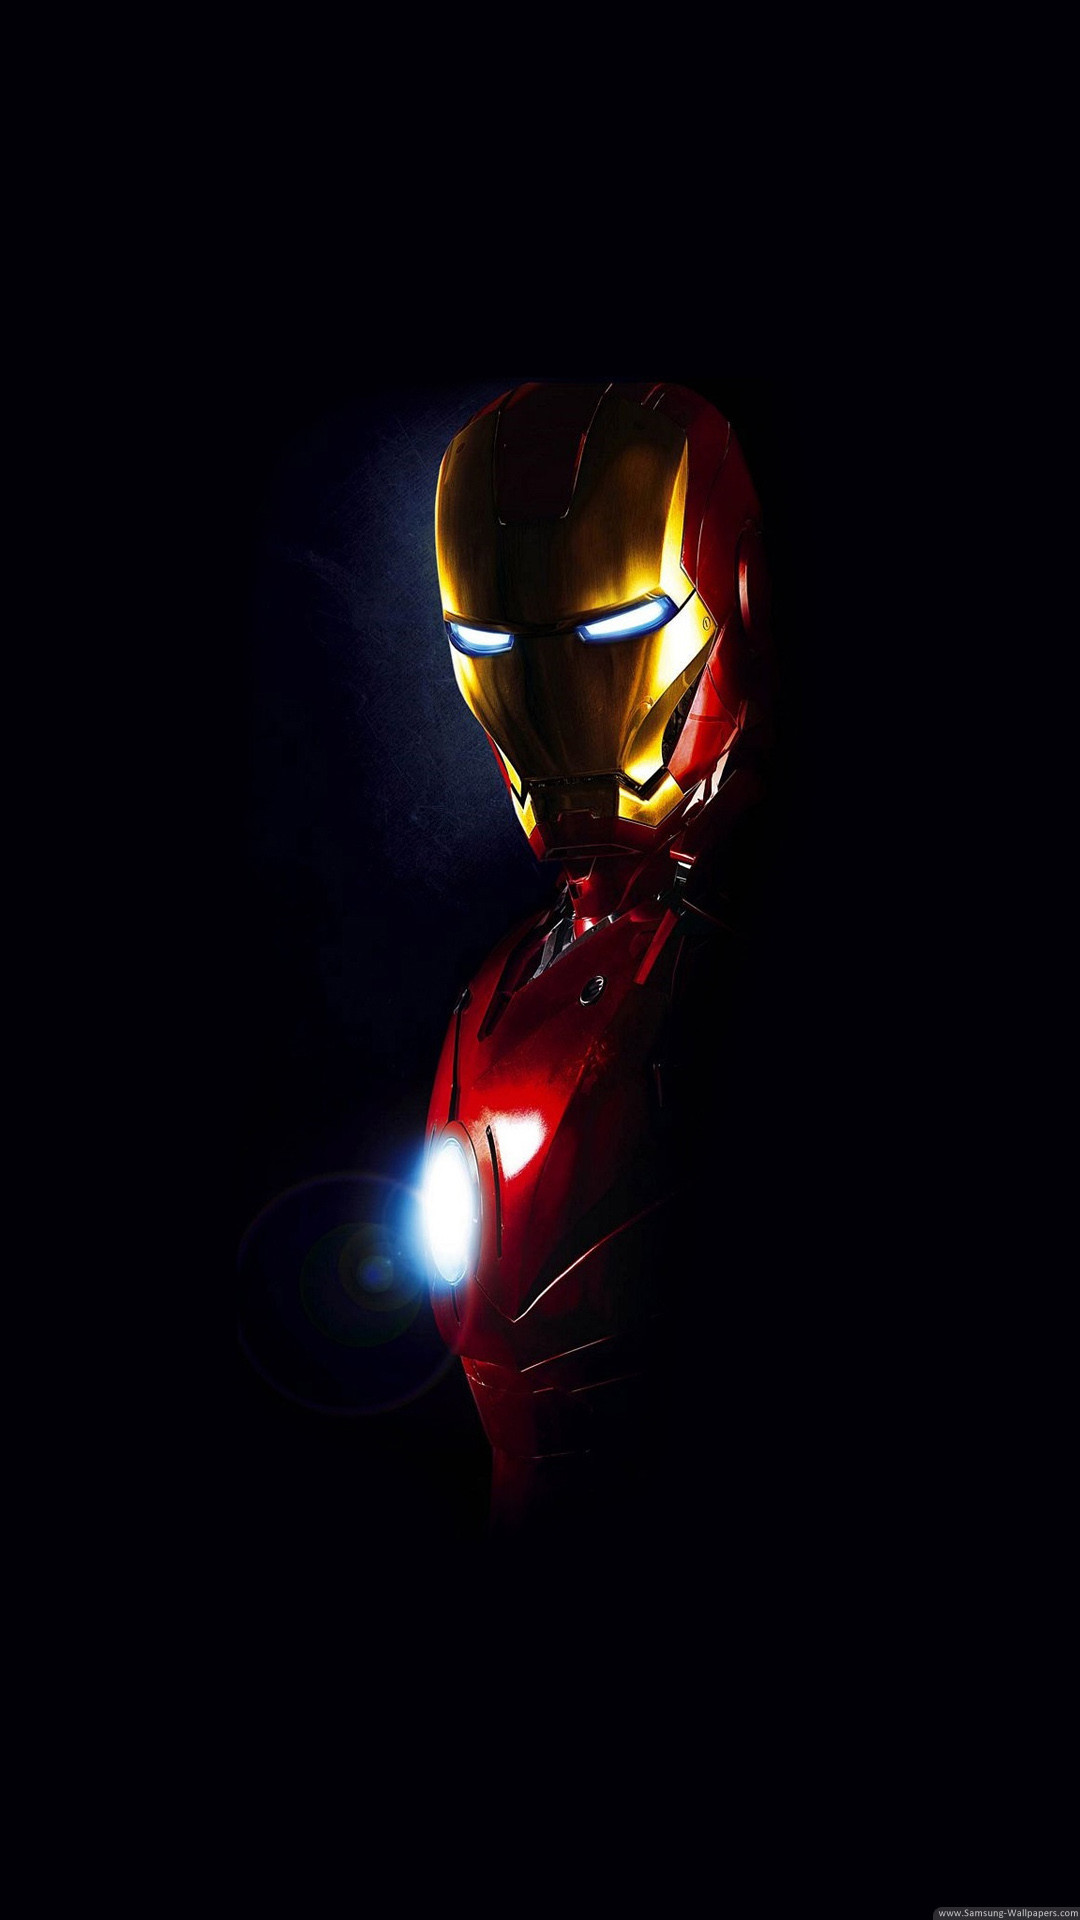 1080x1920 ... wallpaper android iron man - Androidwallpaper ...